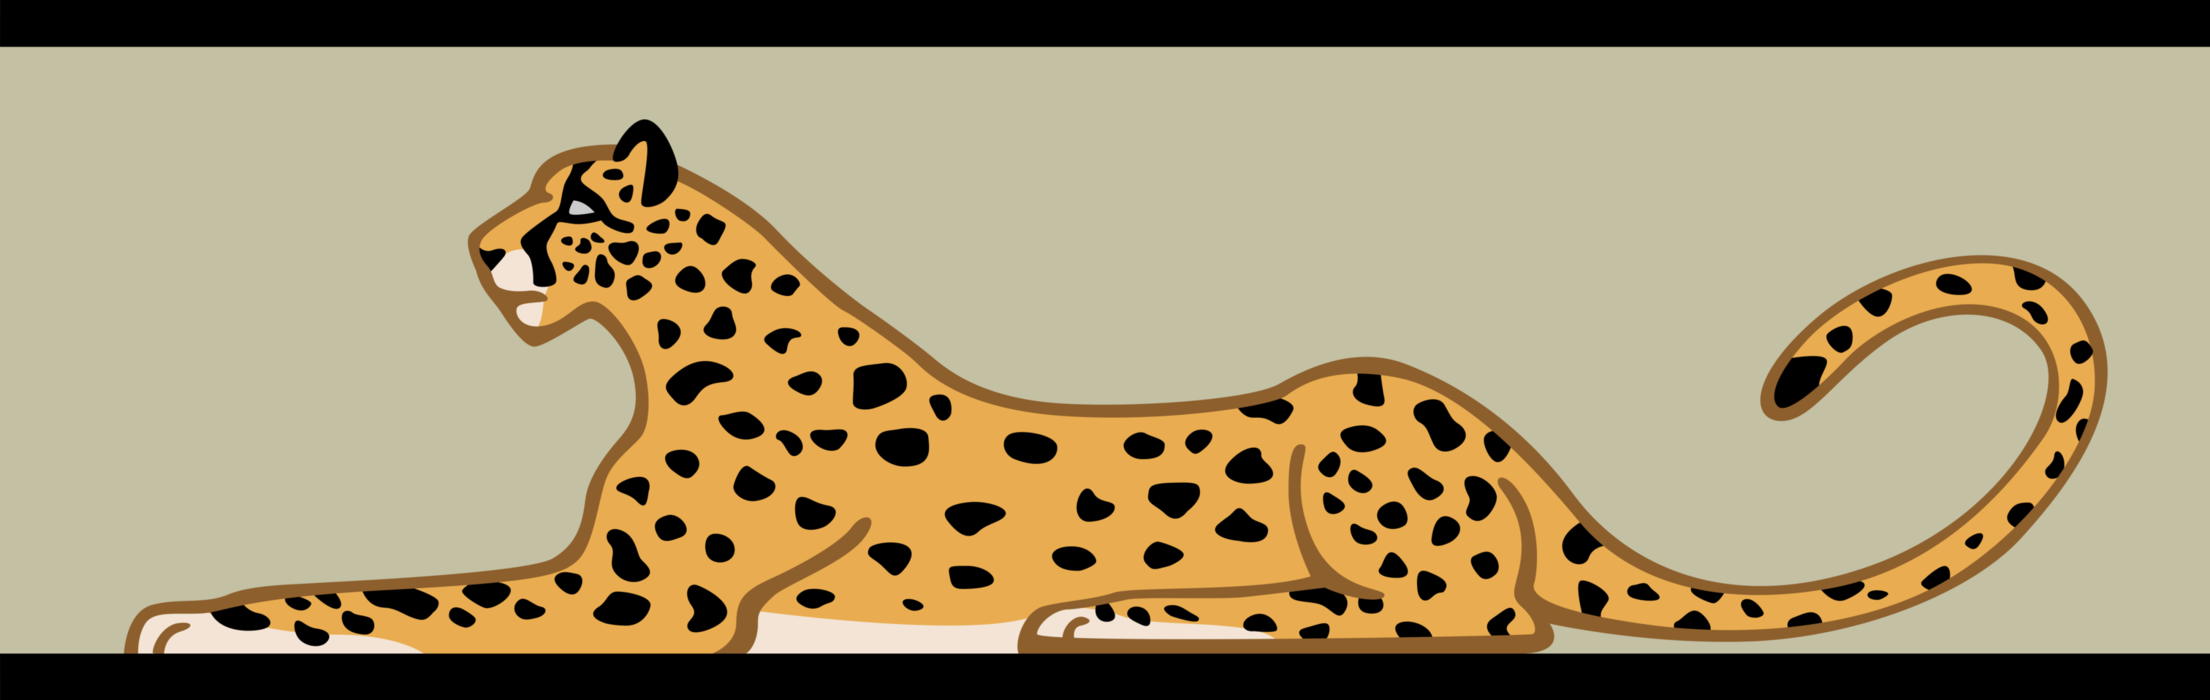 Vector Illustration of Ancient Egyptian Spotted African Carnivore Leopard